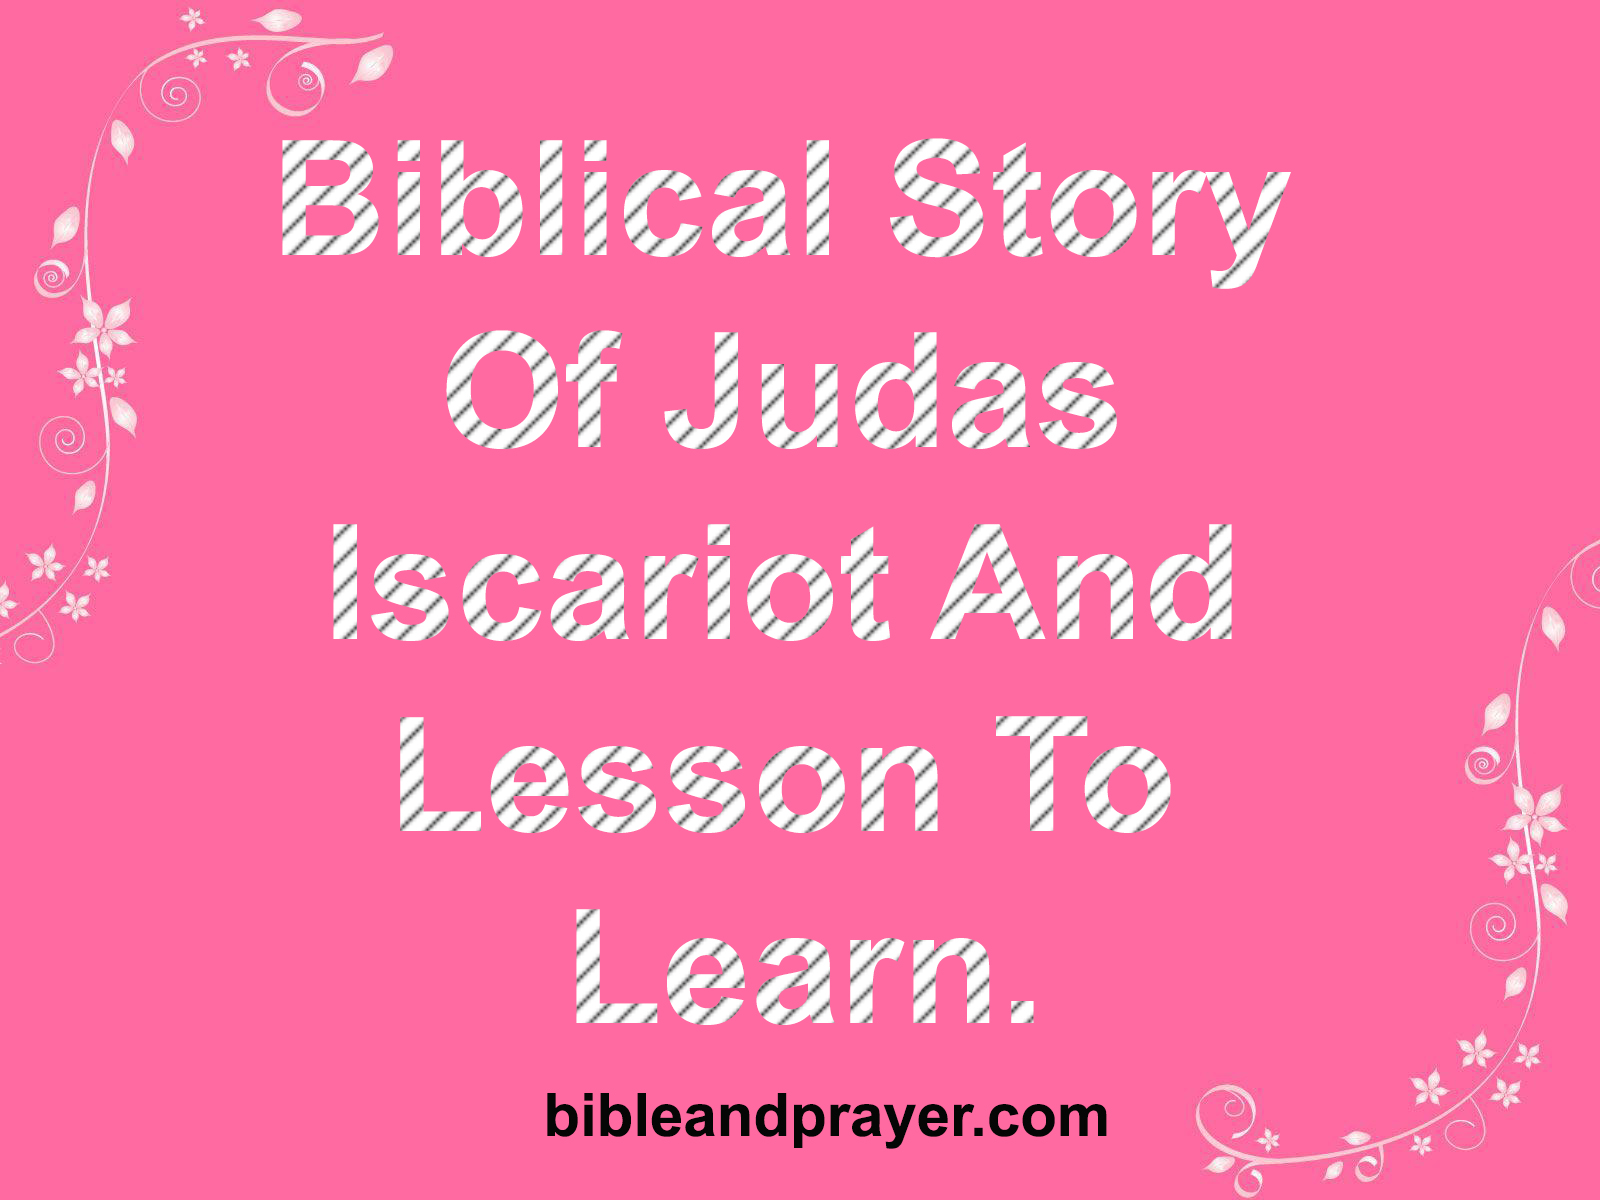 Biblical Story Of Judas Iscariot And Lesson To Learn.